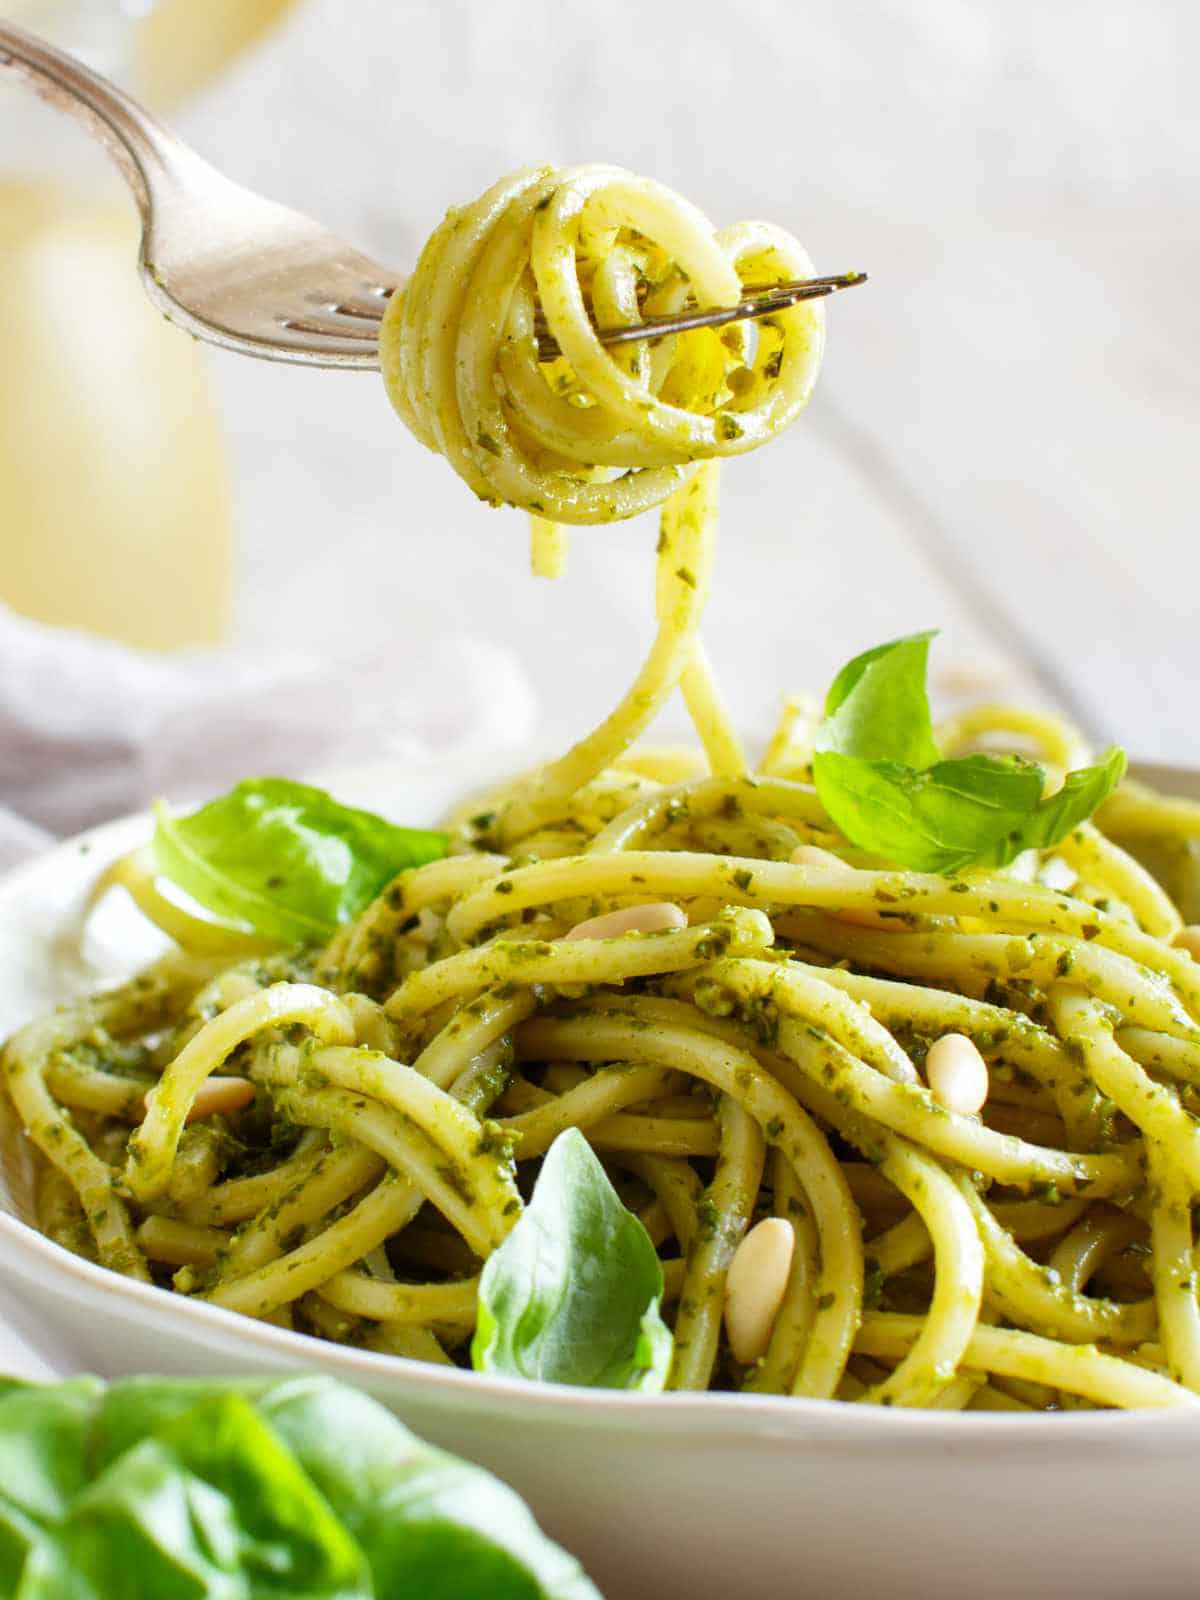 spaghetti with green pesto sauce on a plate with a fork twined with a bite of noodle and pesto mix.